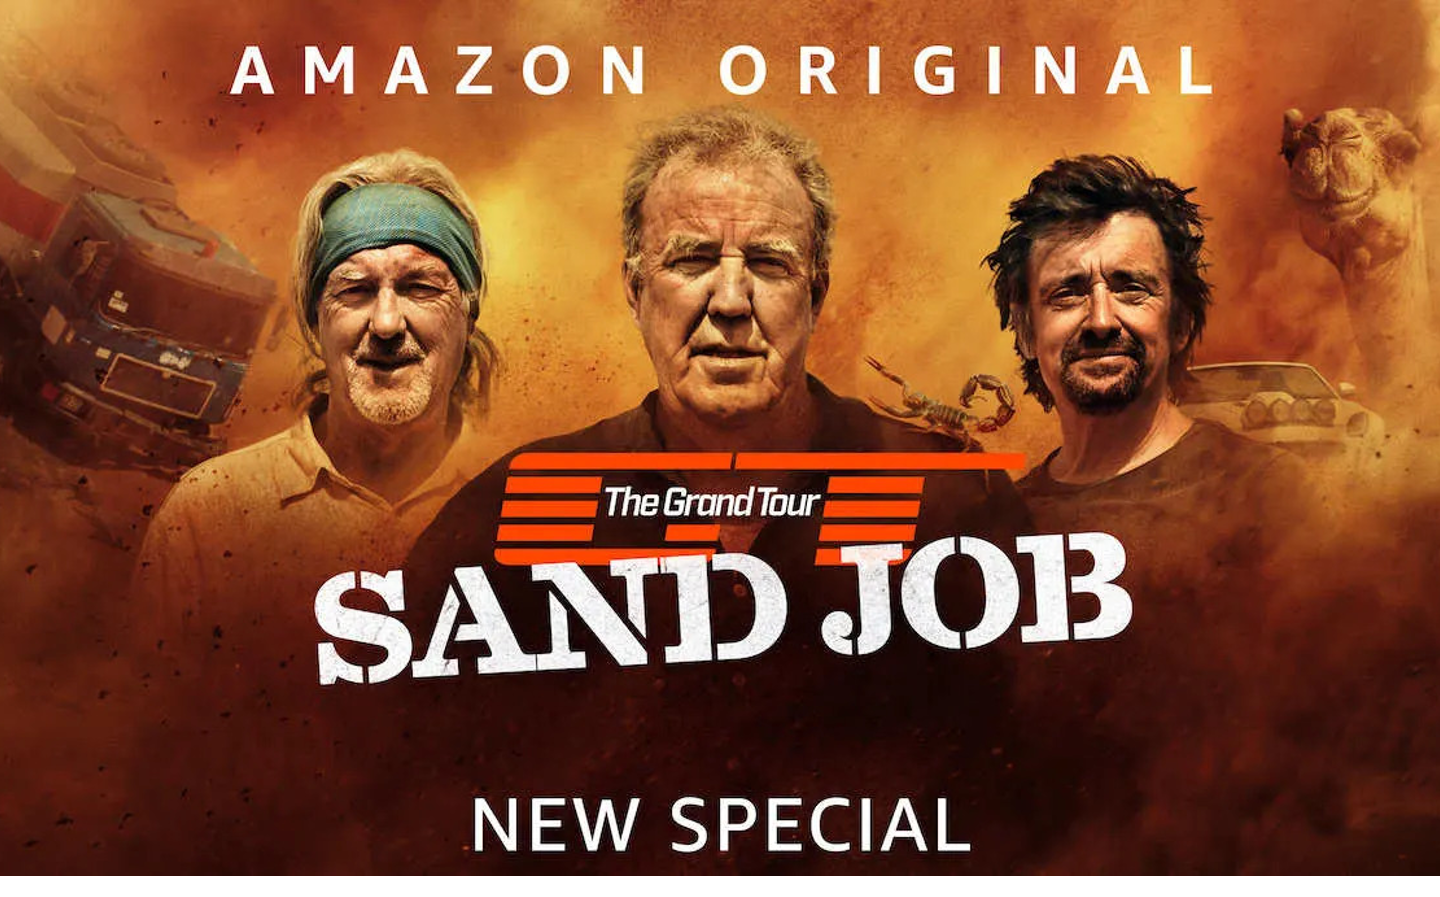 The trailer for the penultimate episode of The Grand Tour has been